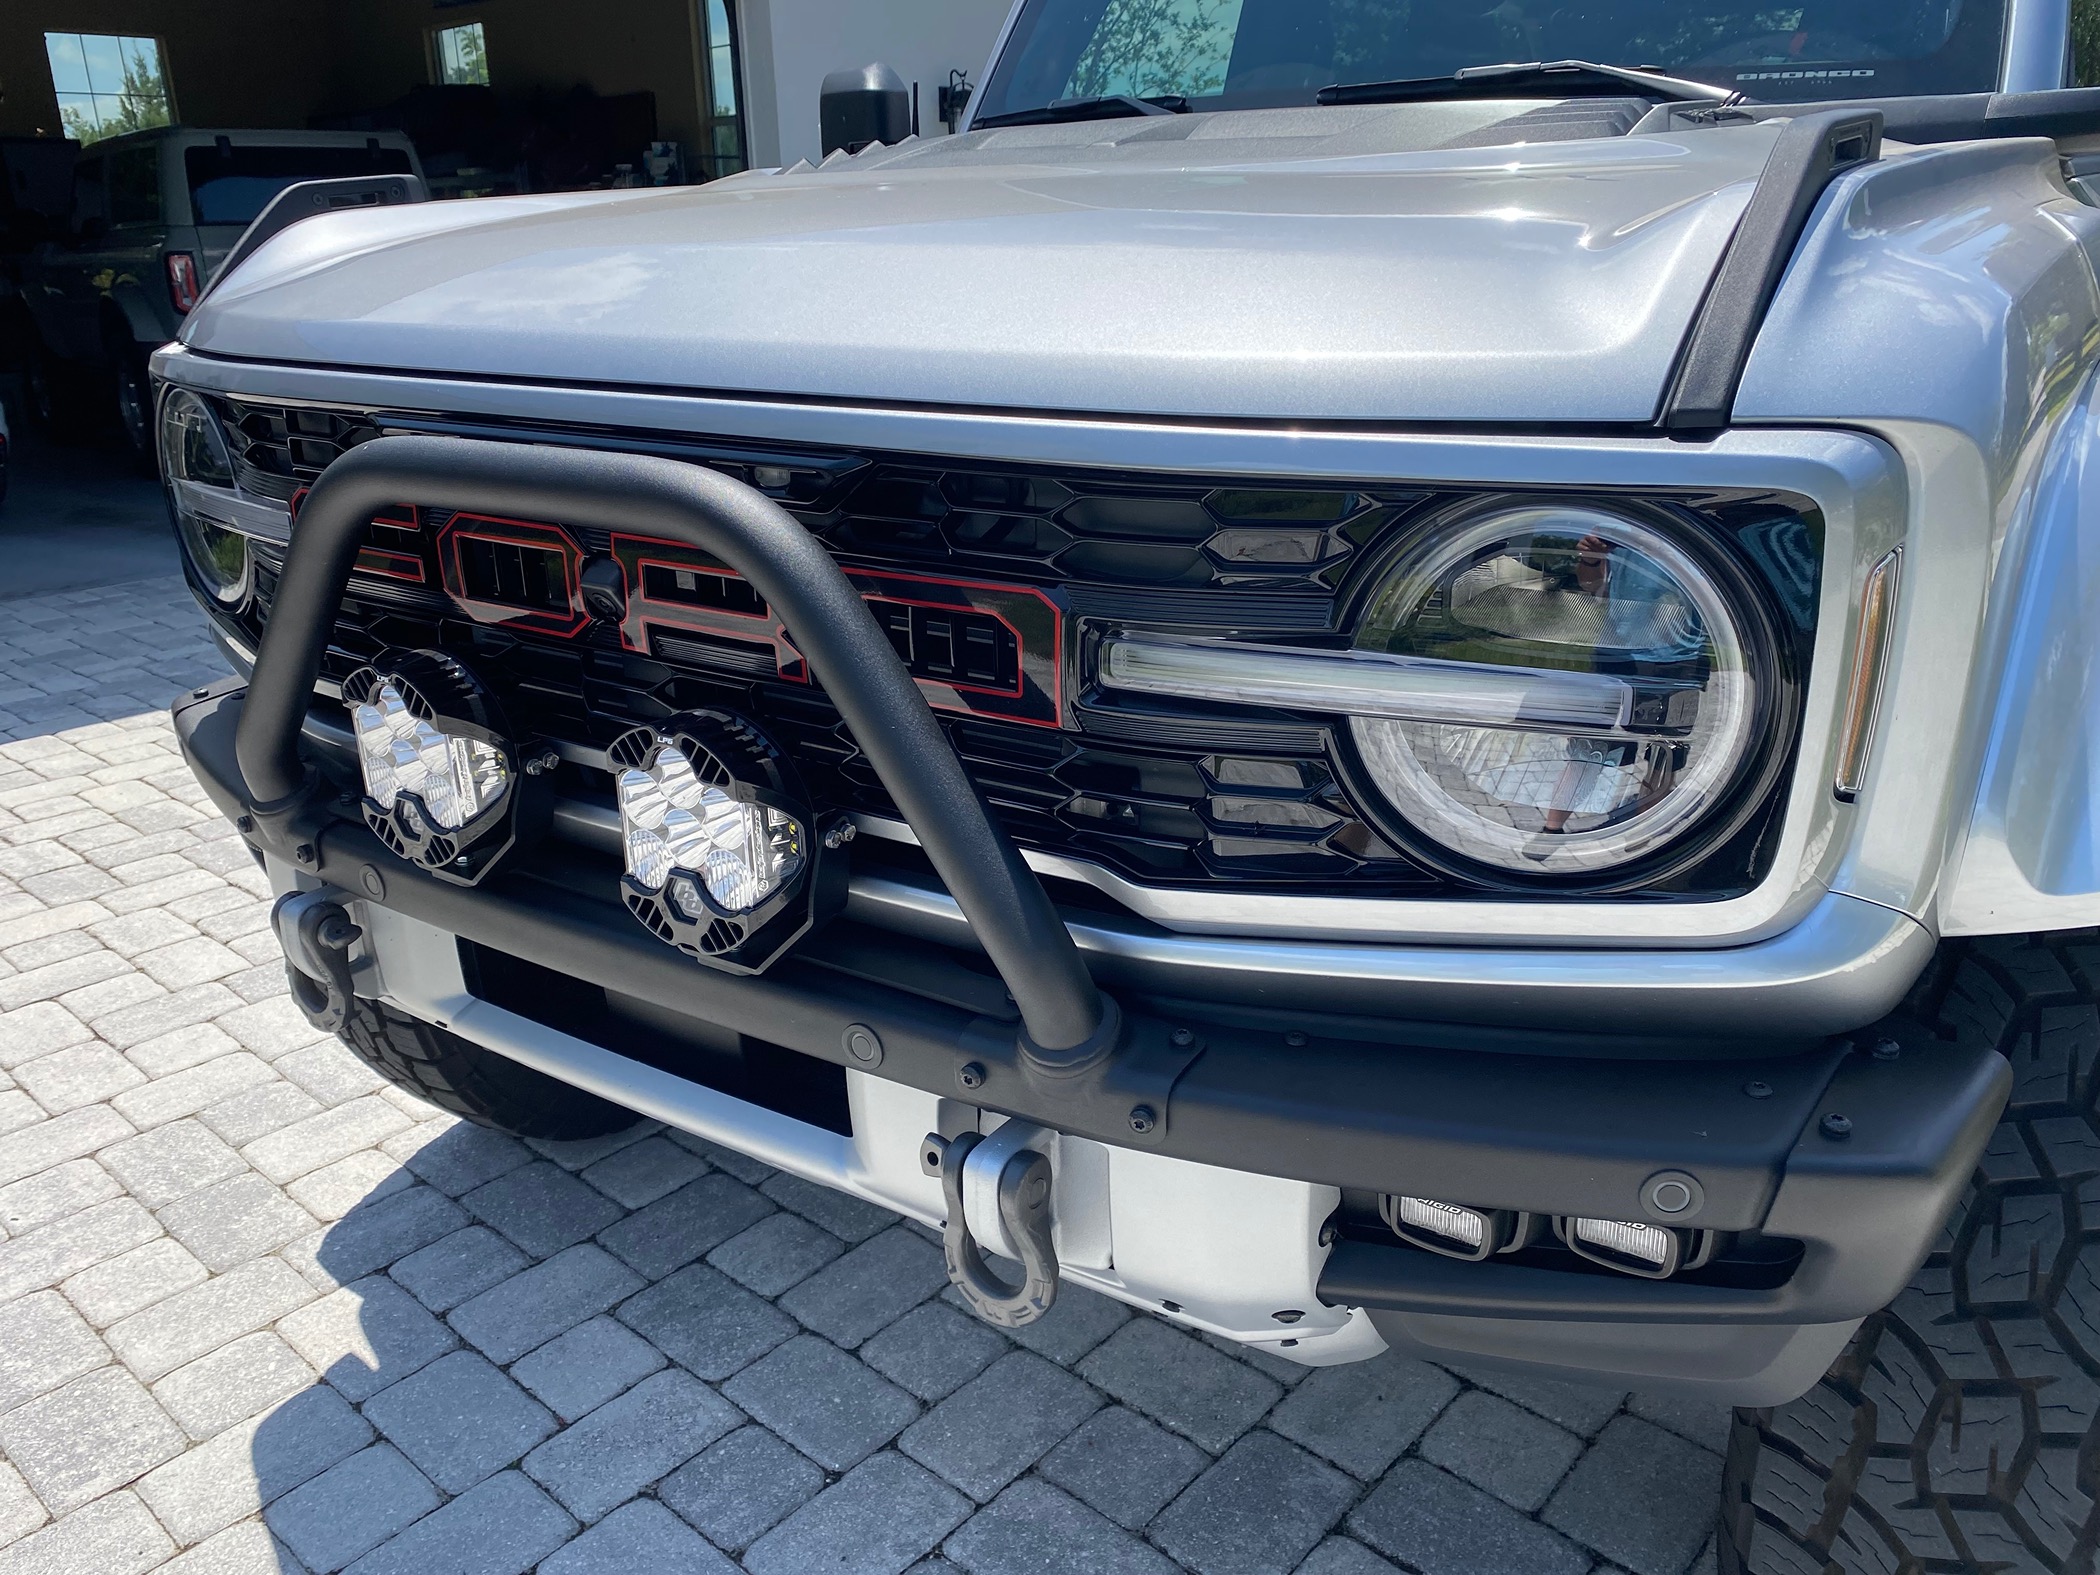 Ford Bronco Front End Friday! Show off your Bronco! IMG_1116